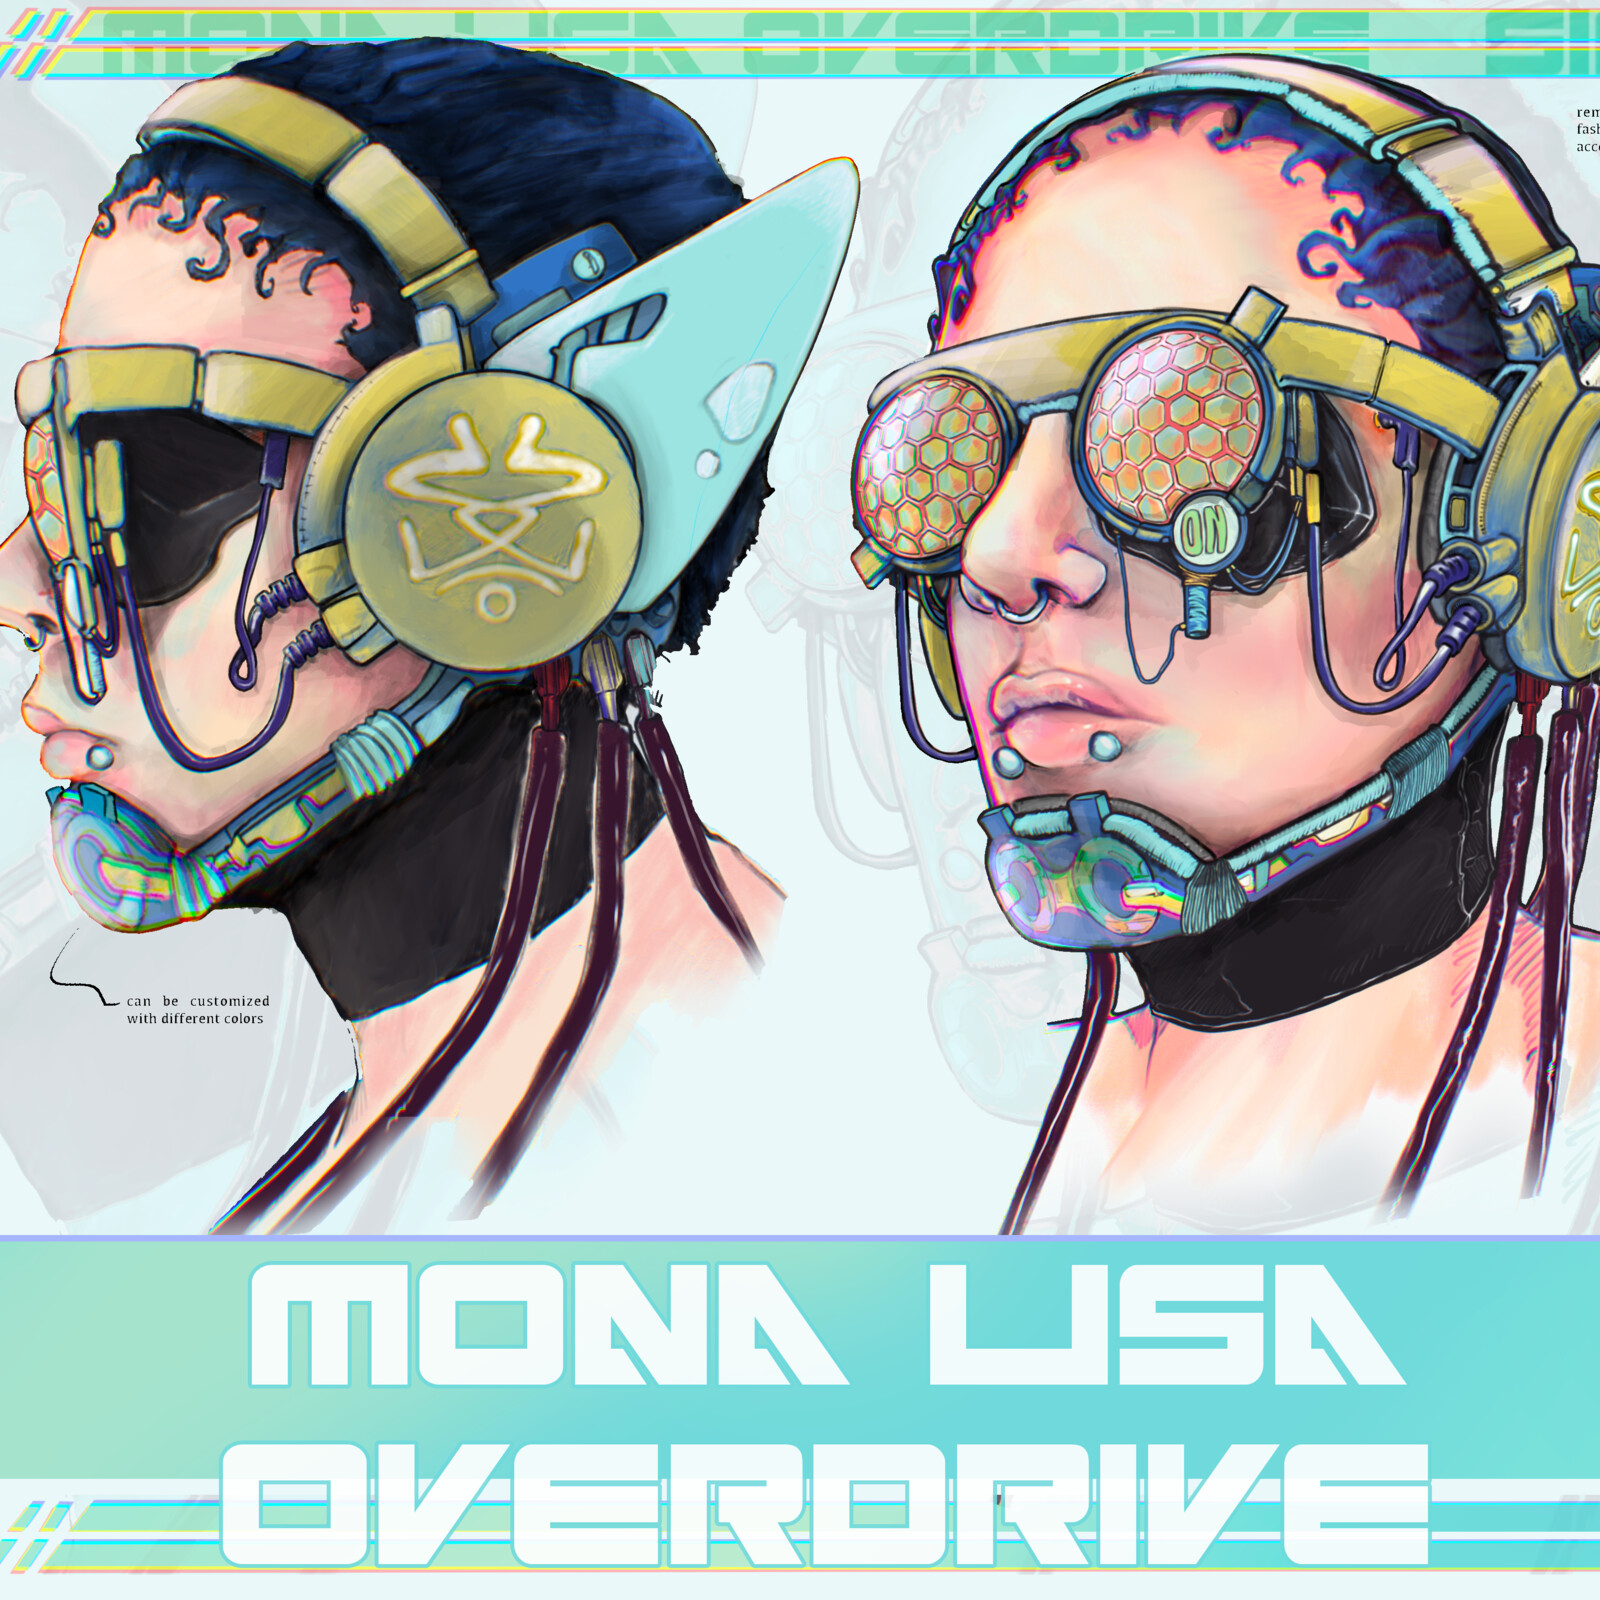 FZD/props: Mona Lisa overdrive, Simstim Device and Headset